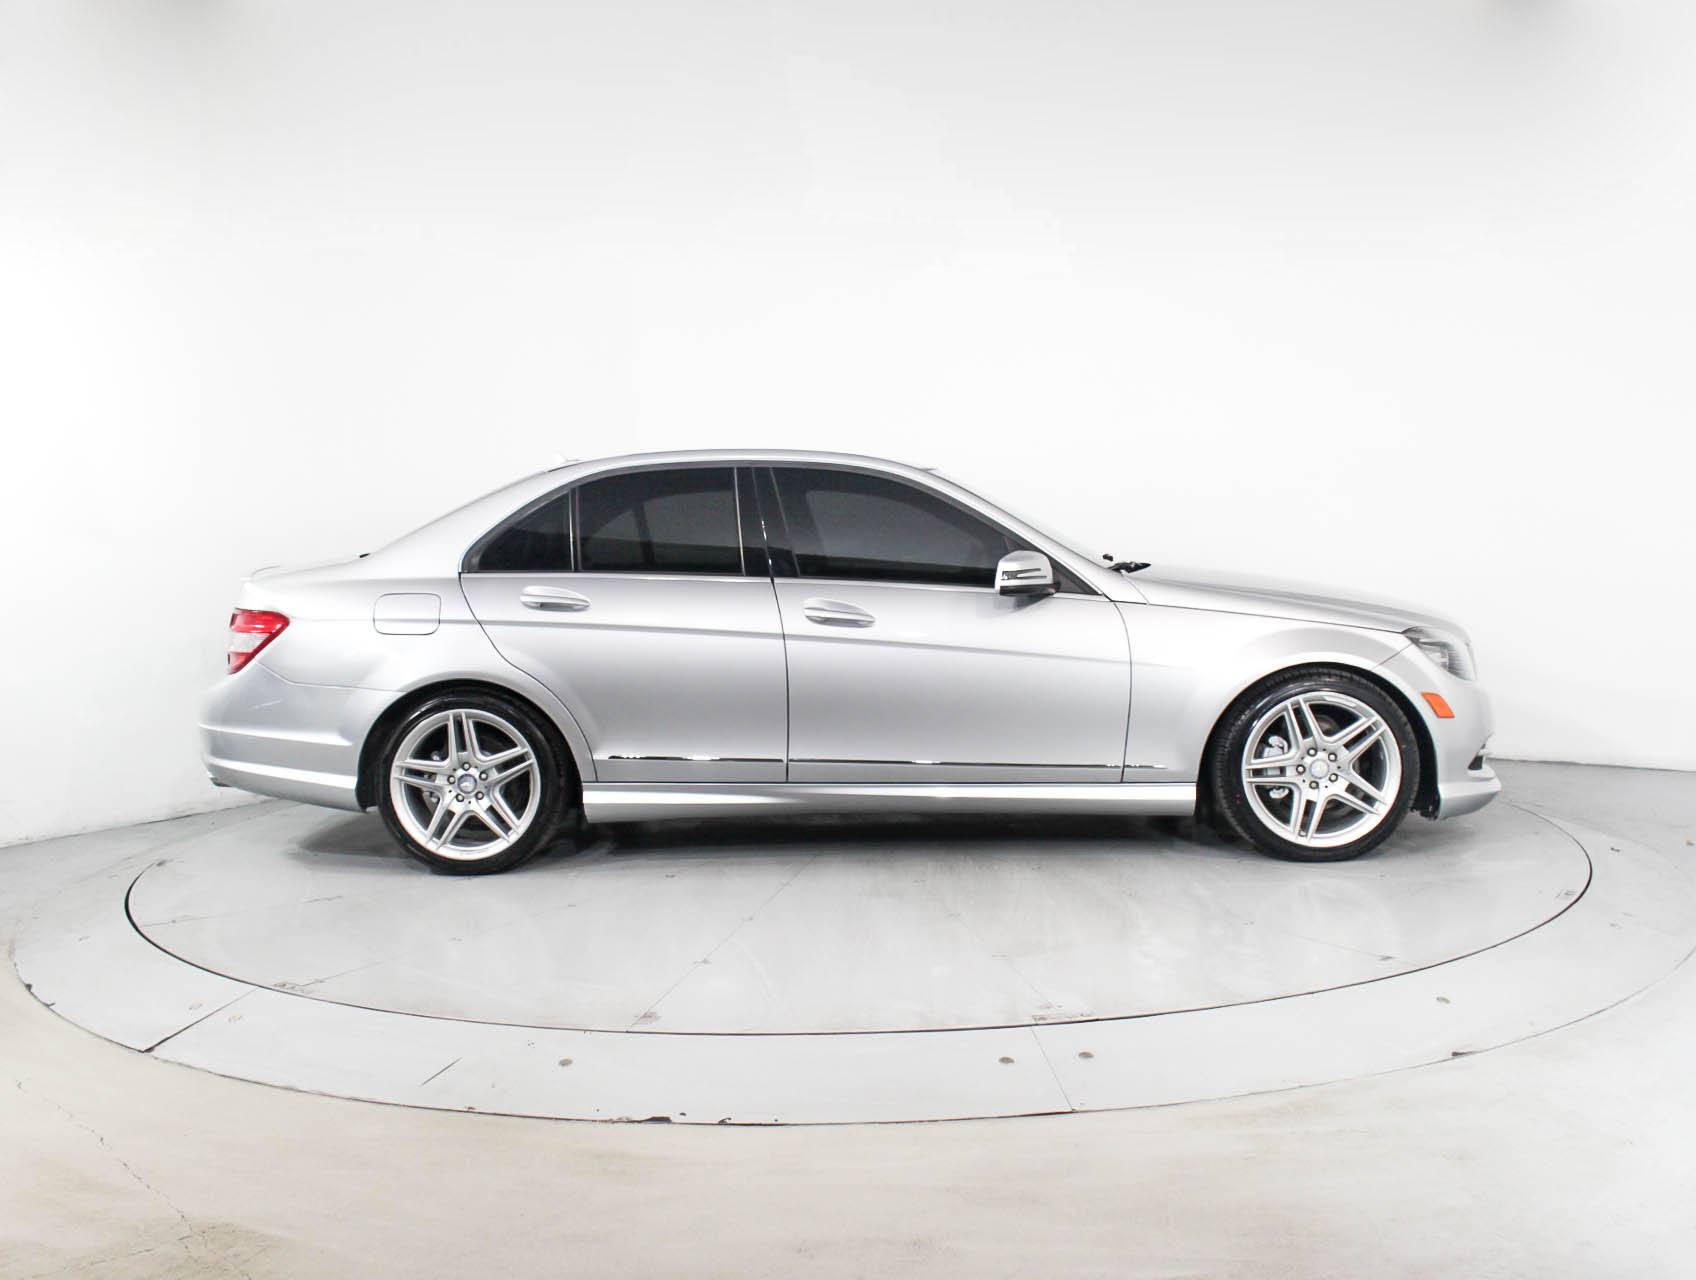 Florida Fine Cars - Used MERCEDES-BENZ C CLASS 2011 HOLLYWOOD C300 Sport